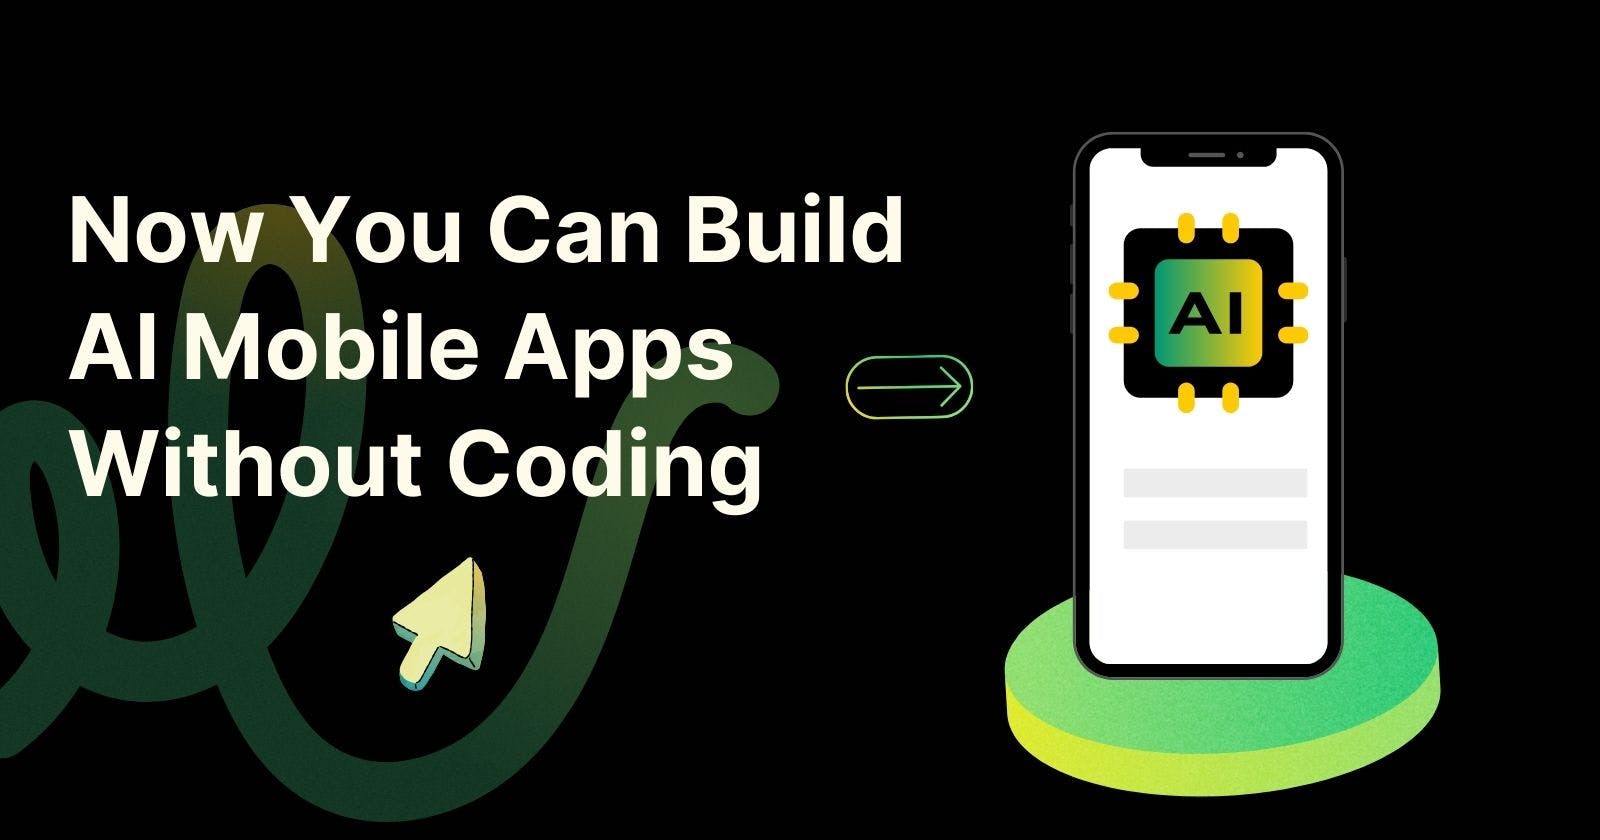 How to build AI mobile apps without coding?